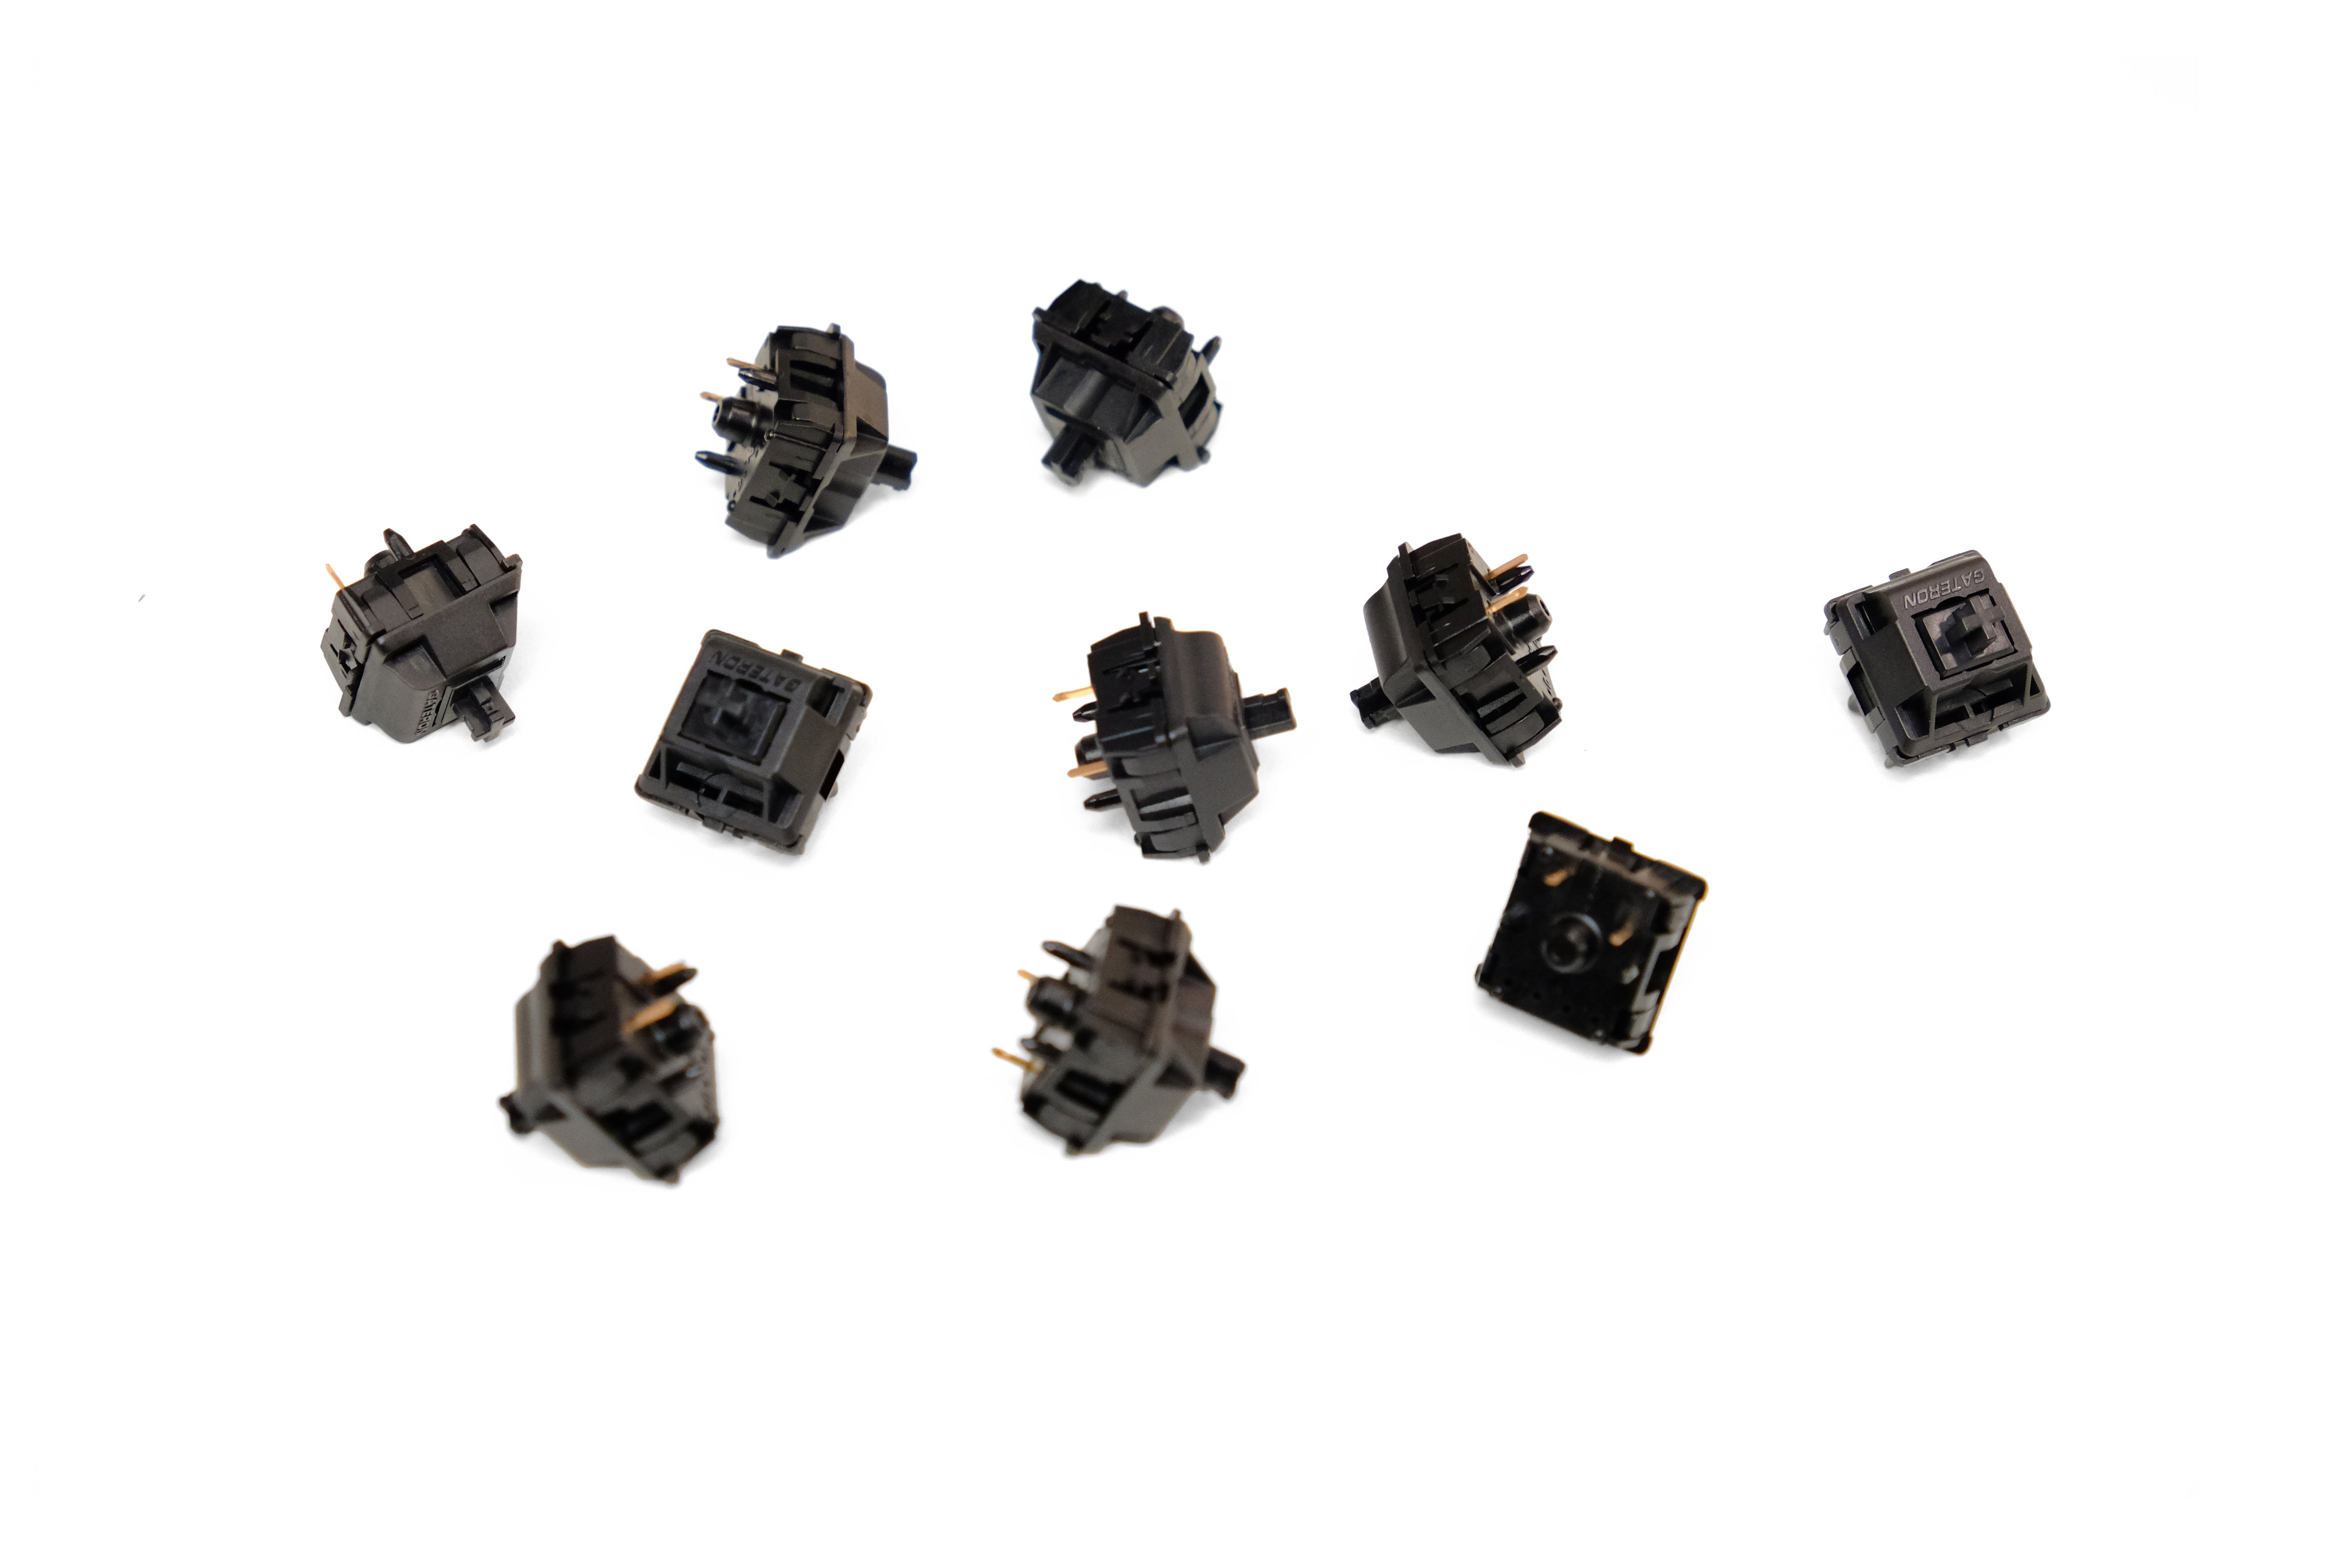 Group of Gateron Oil King Linear Switches